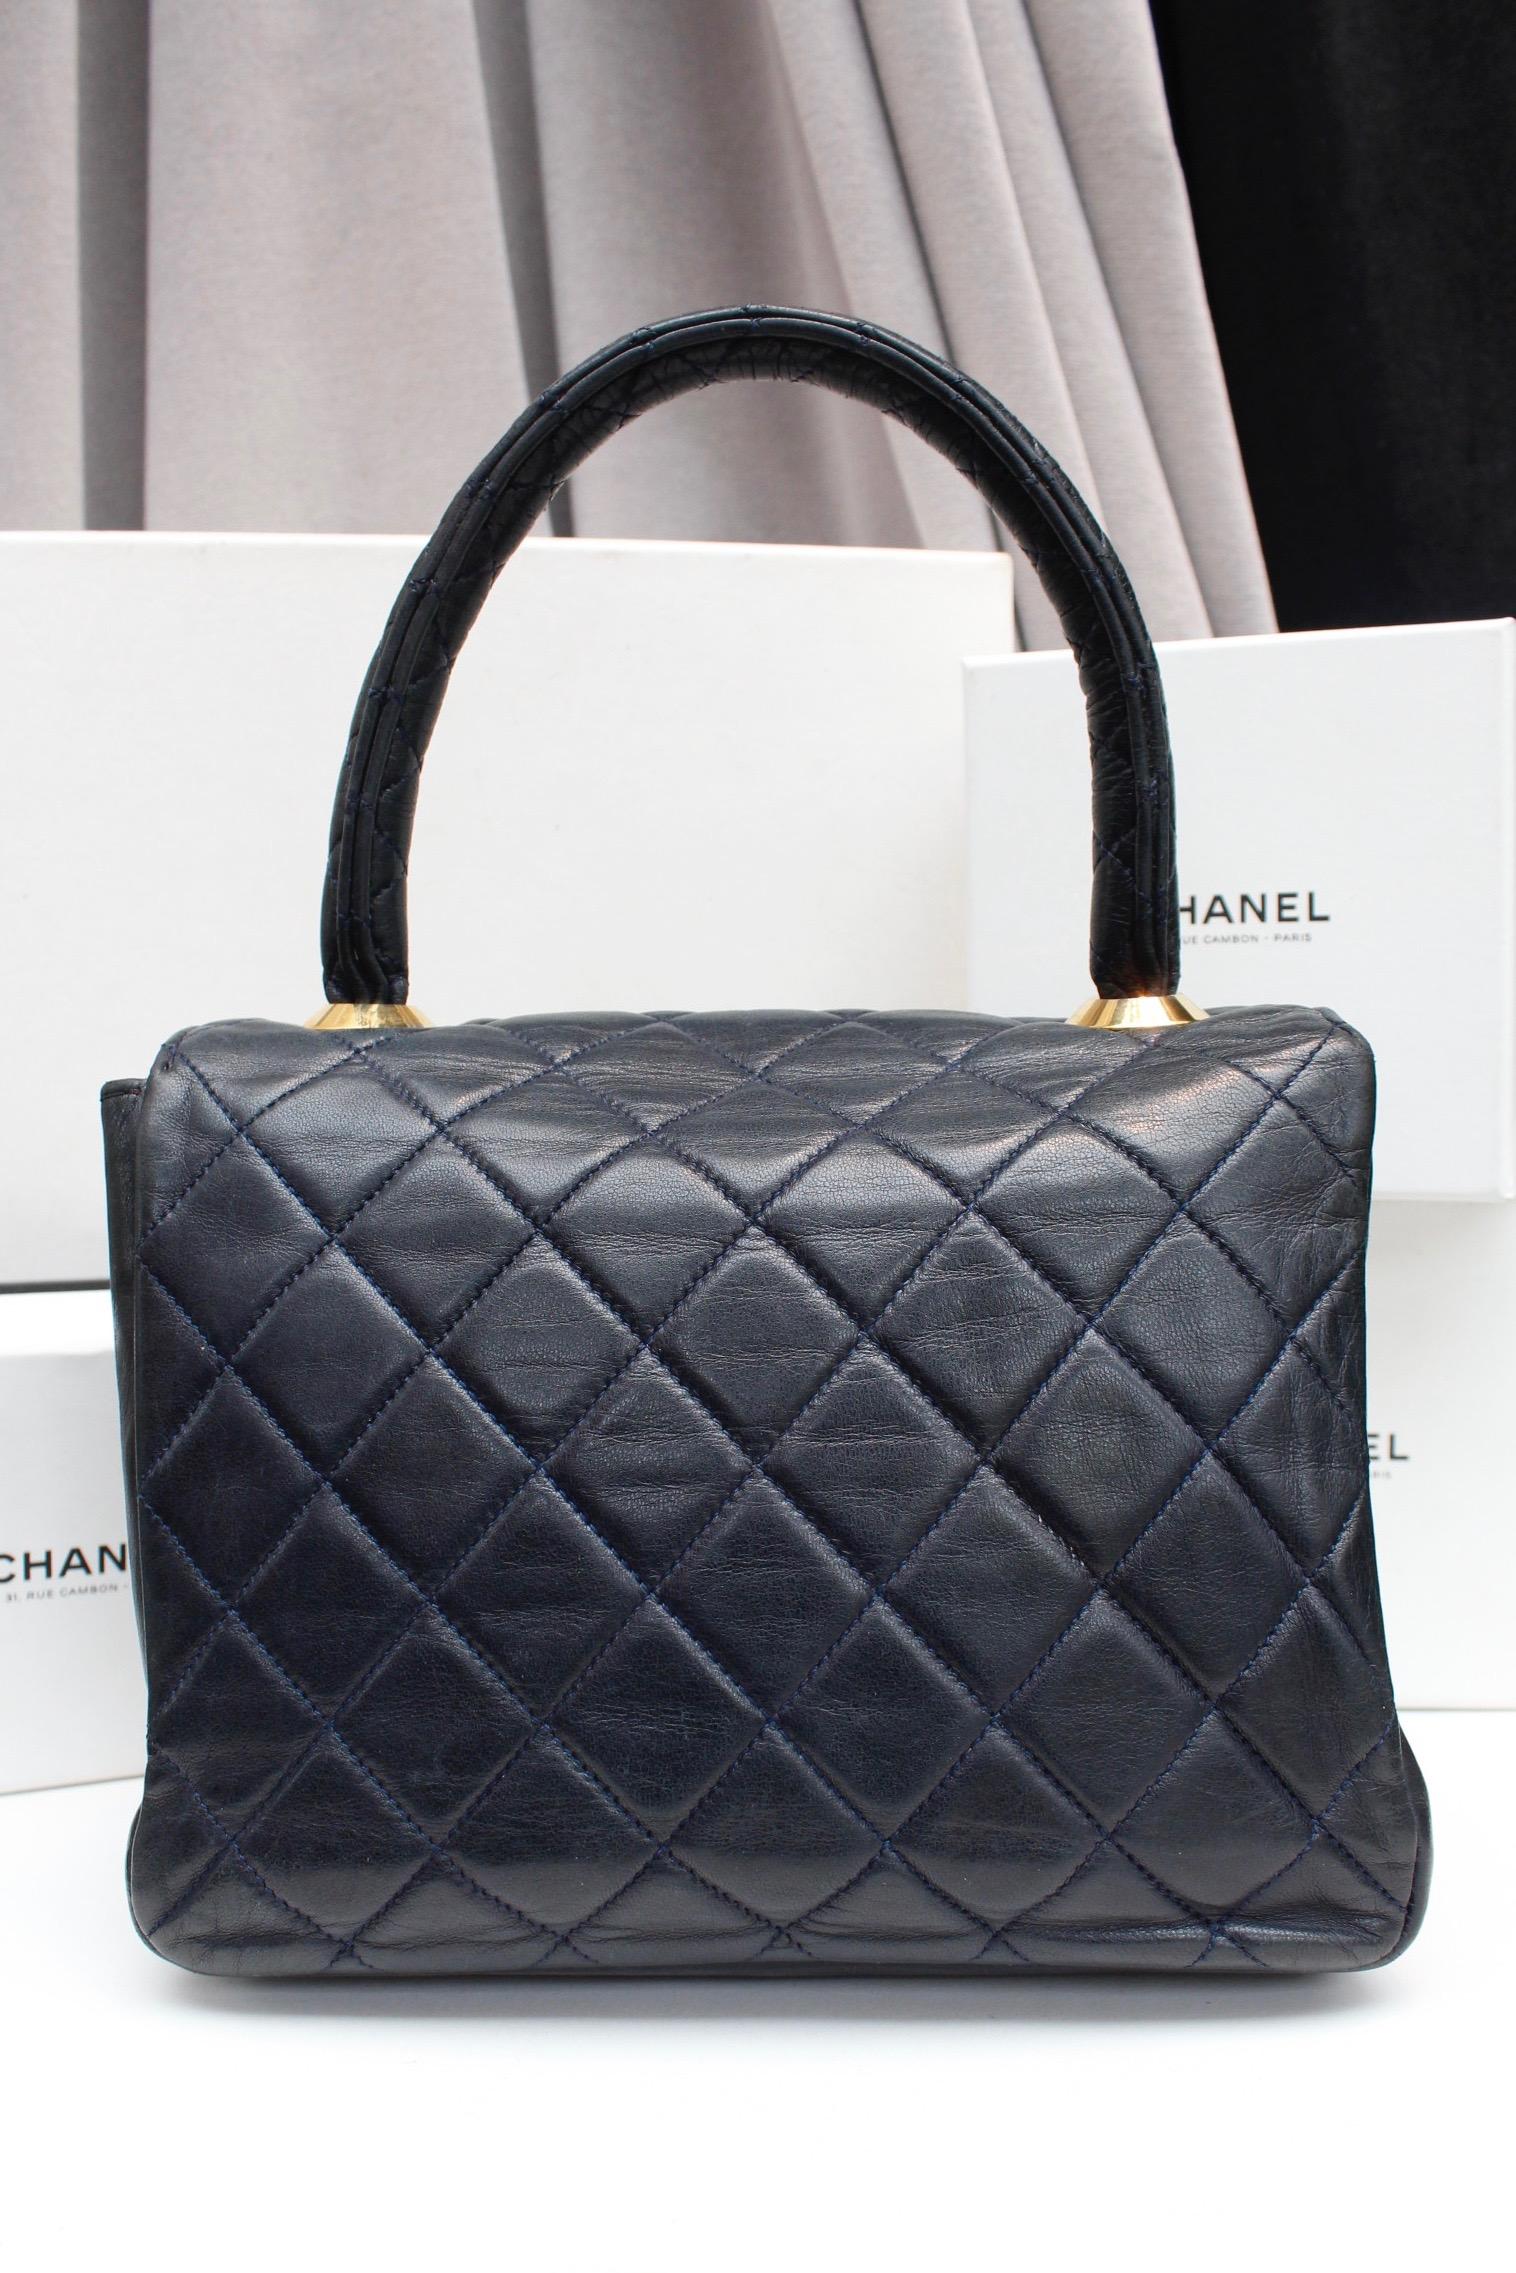 Chanel charming midnight blue quilted leather bag In Good Condition For Sale In Paris, FR